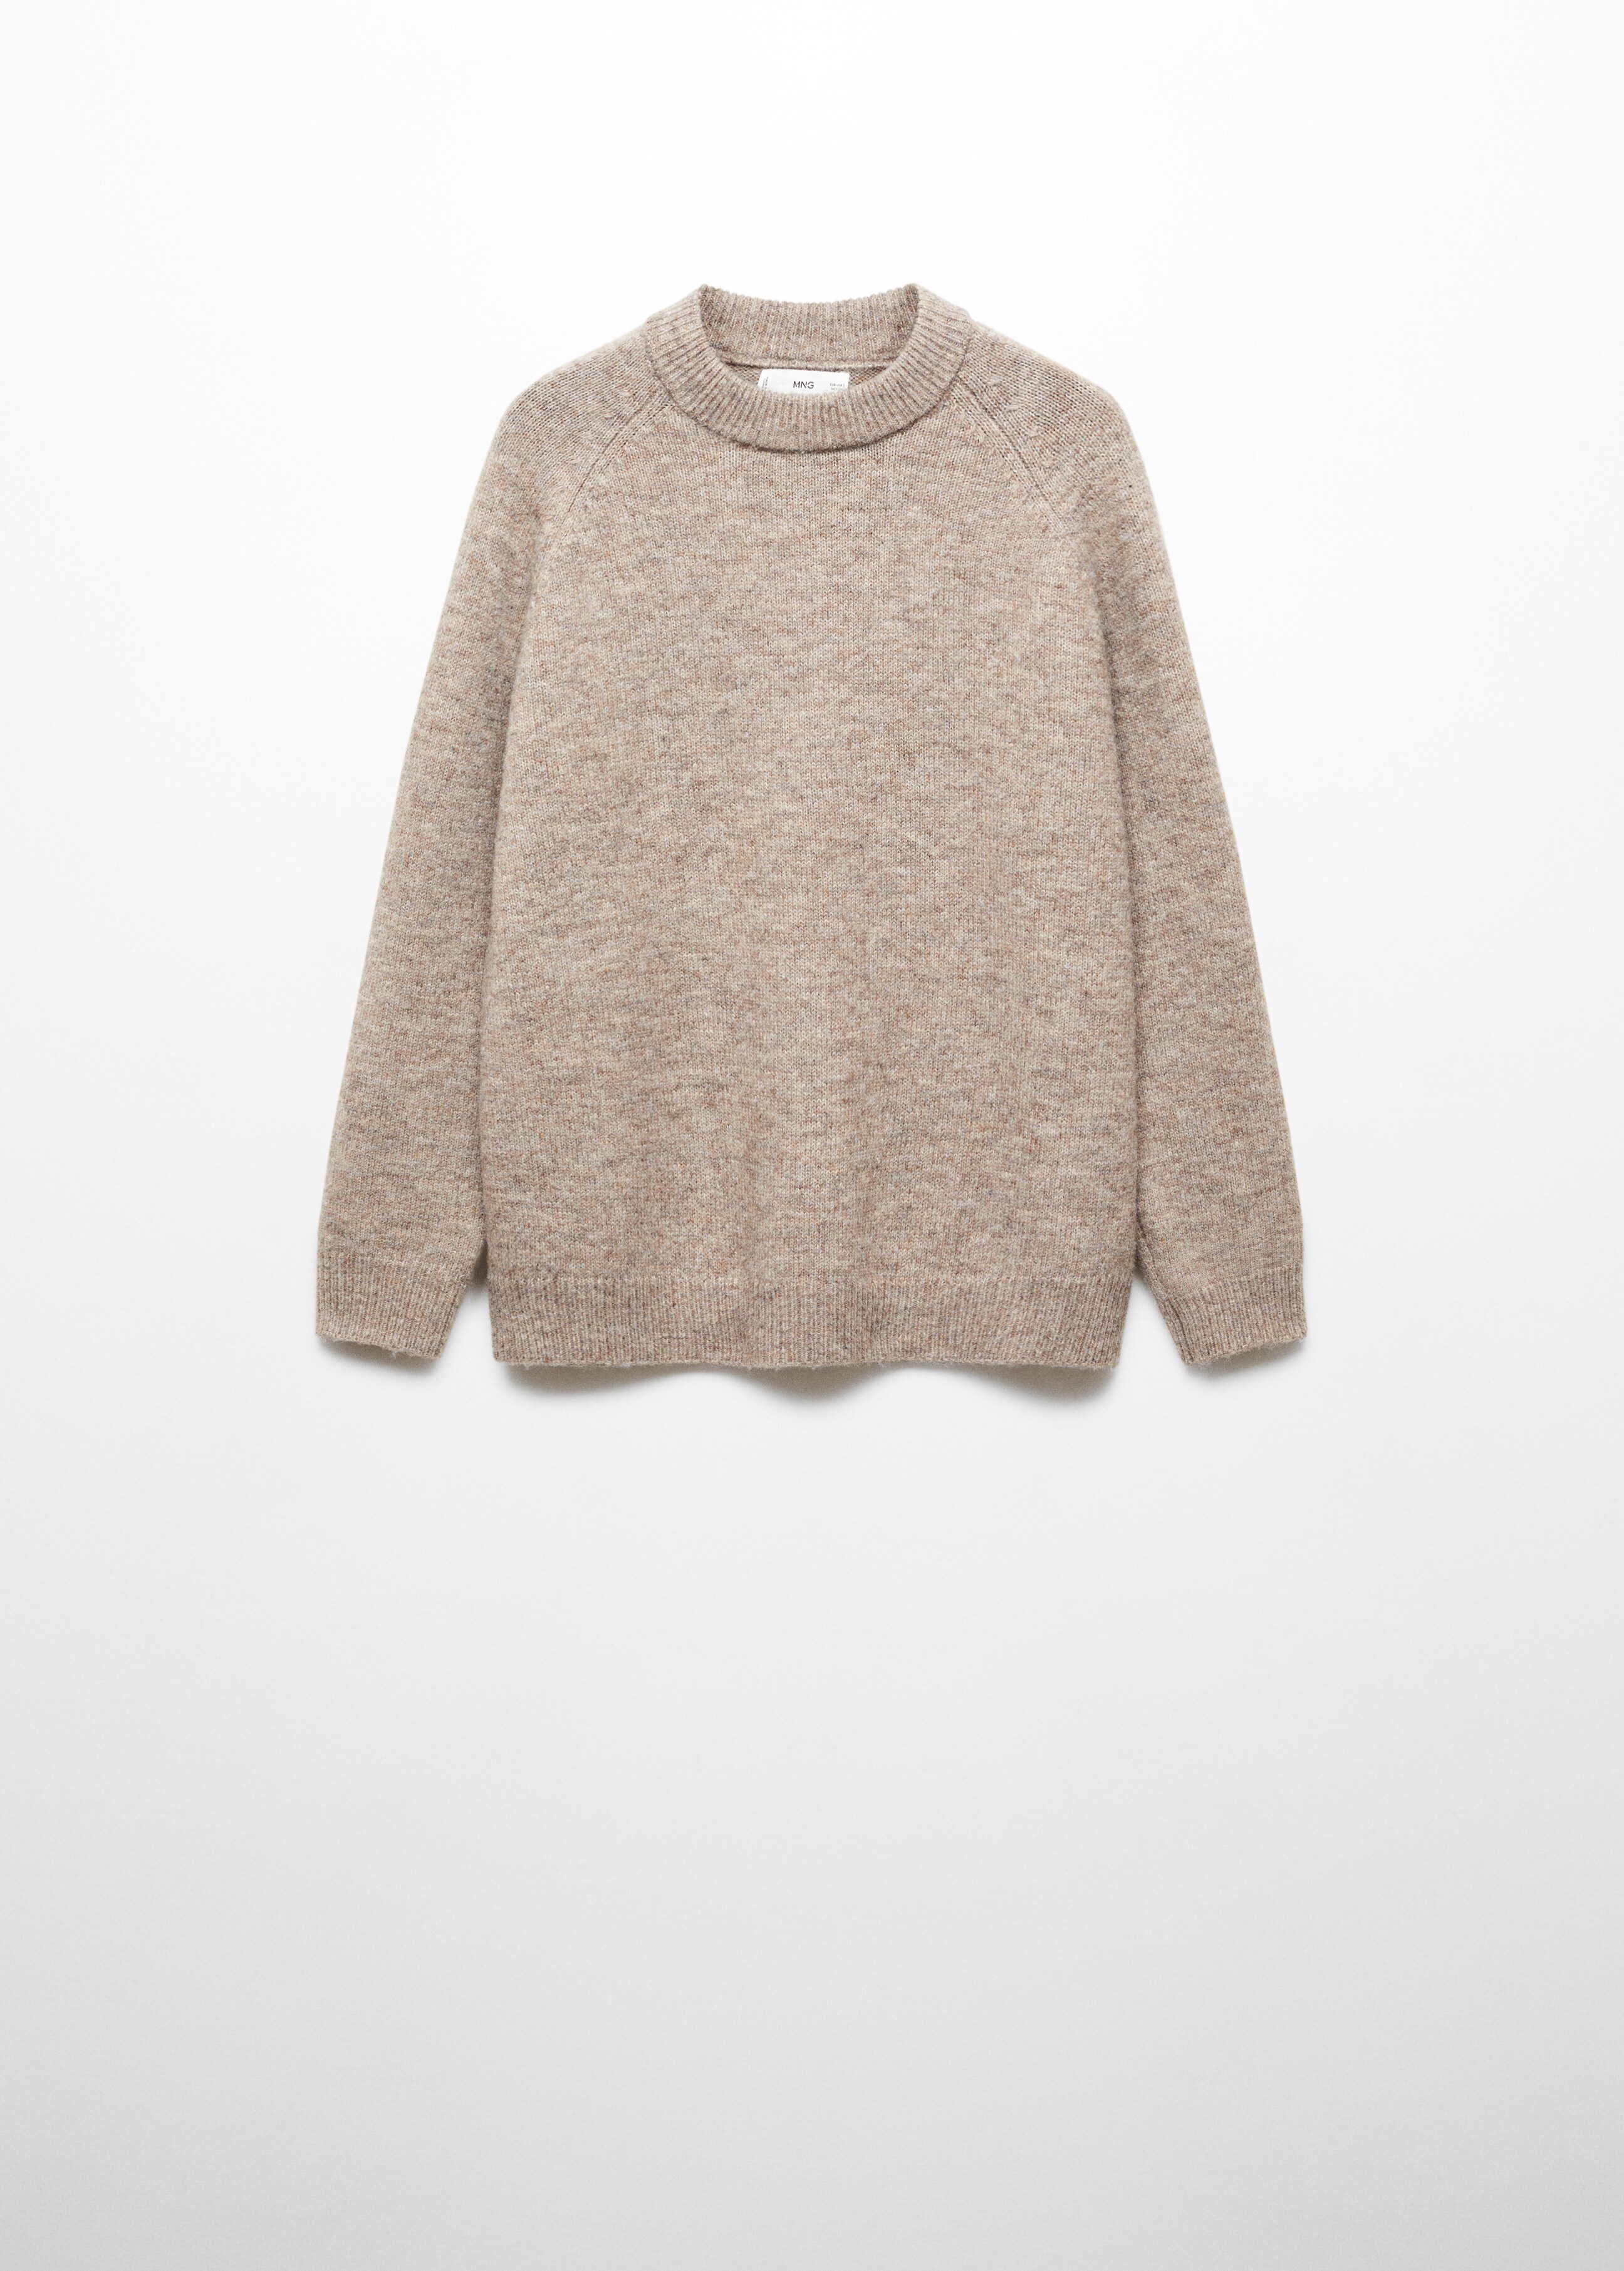 Cotton-linen round-neck knitted sweater - Article without model